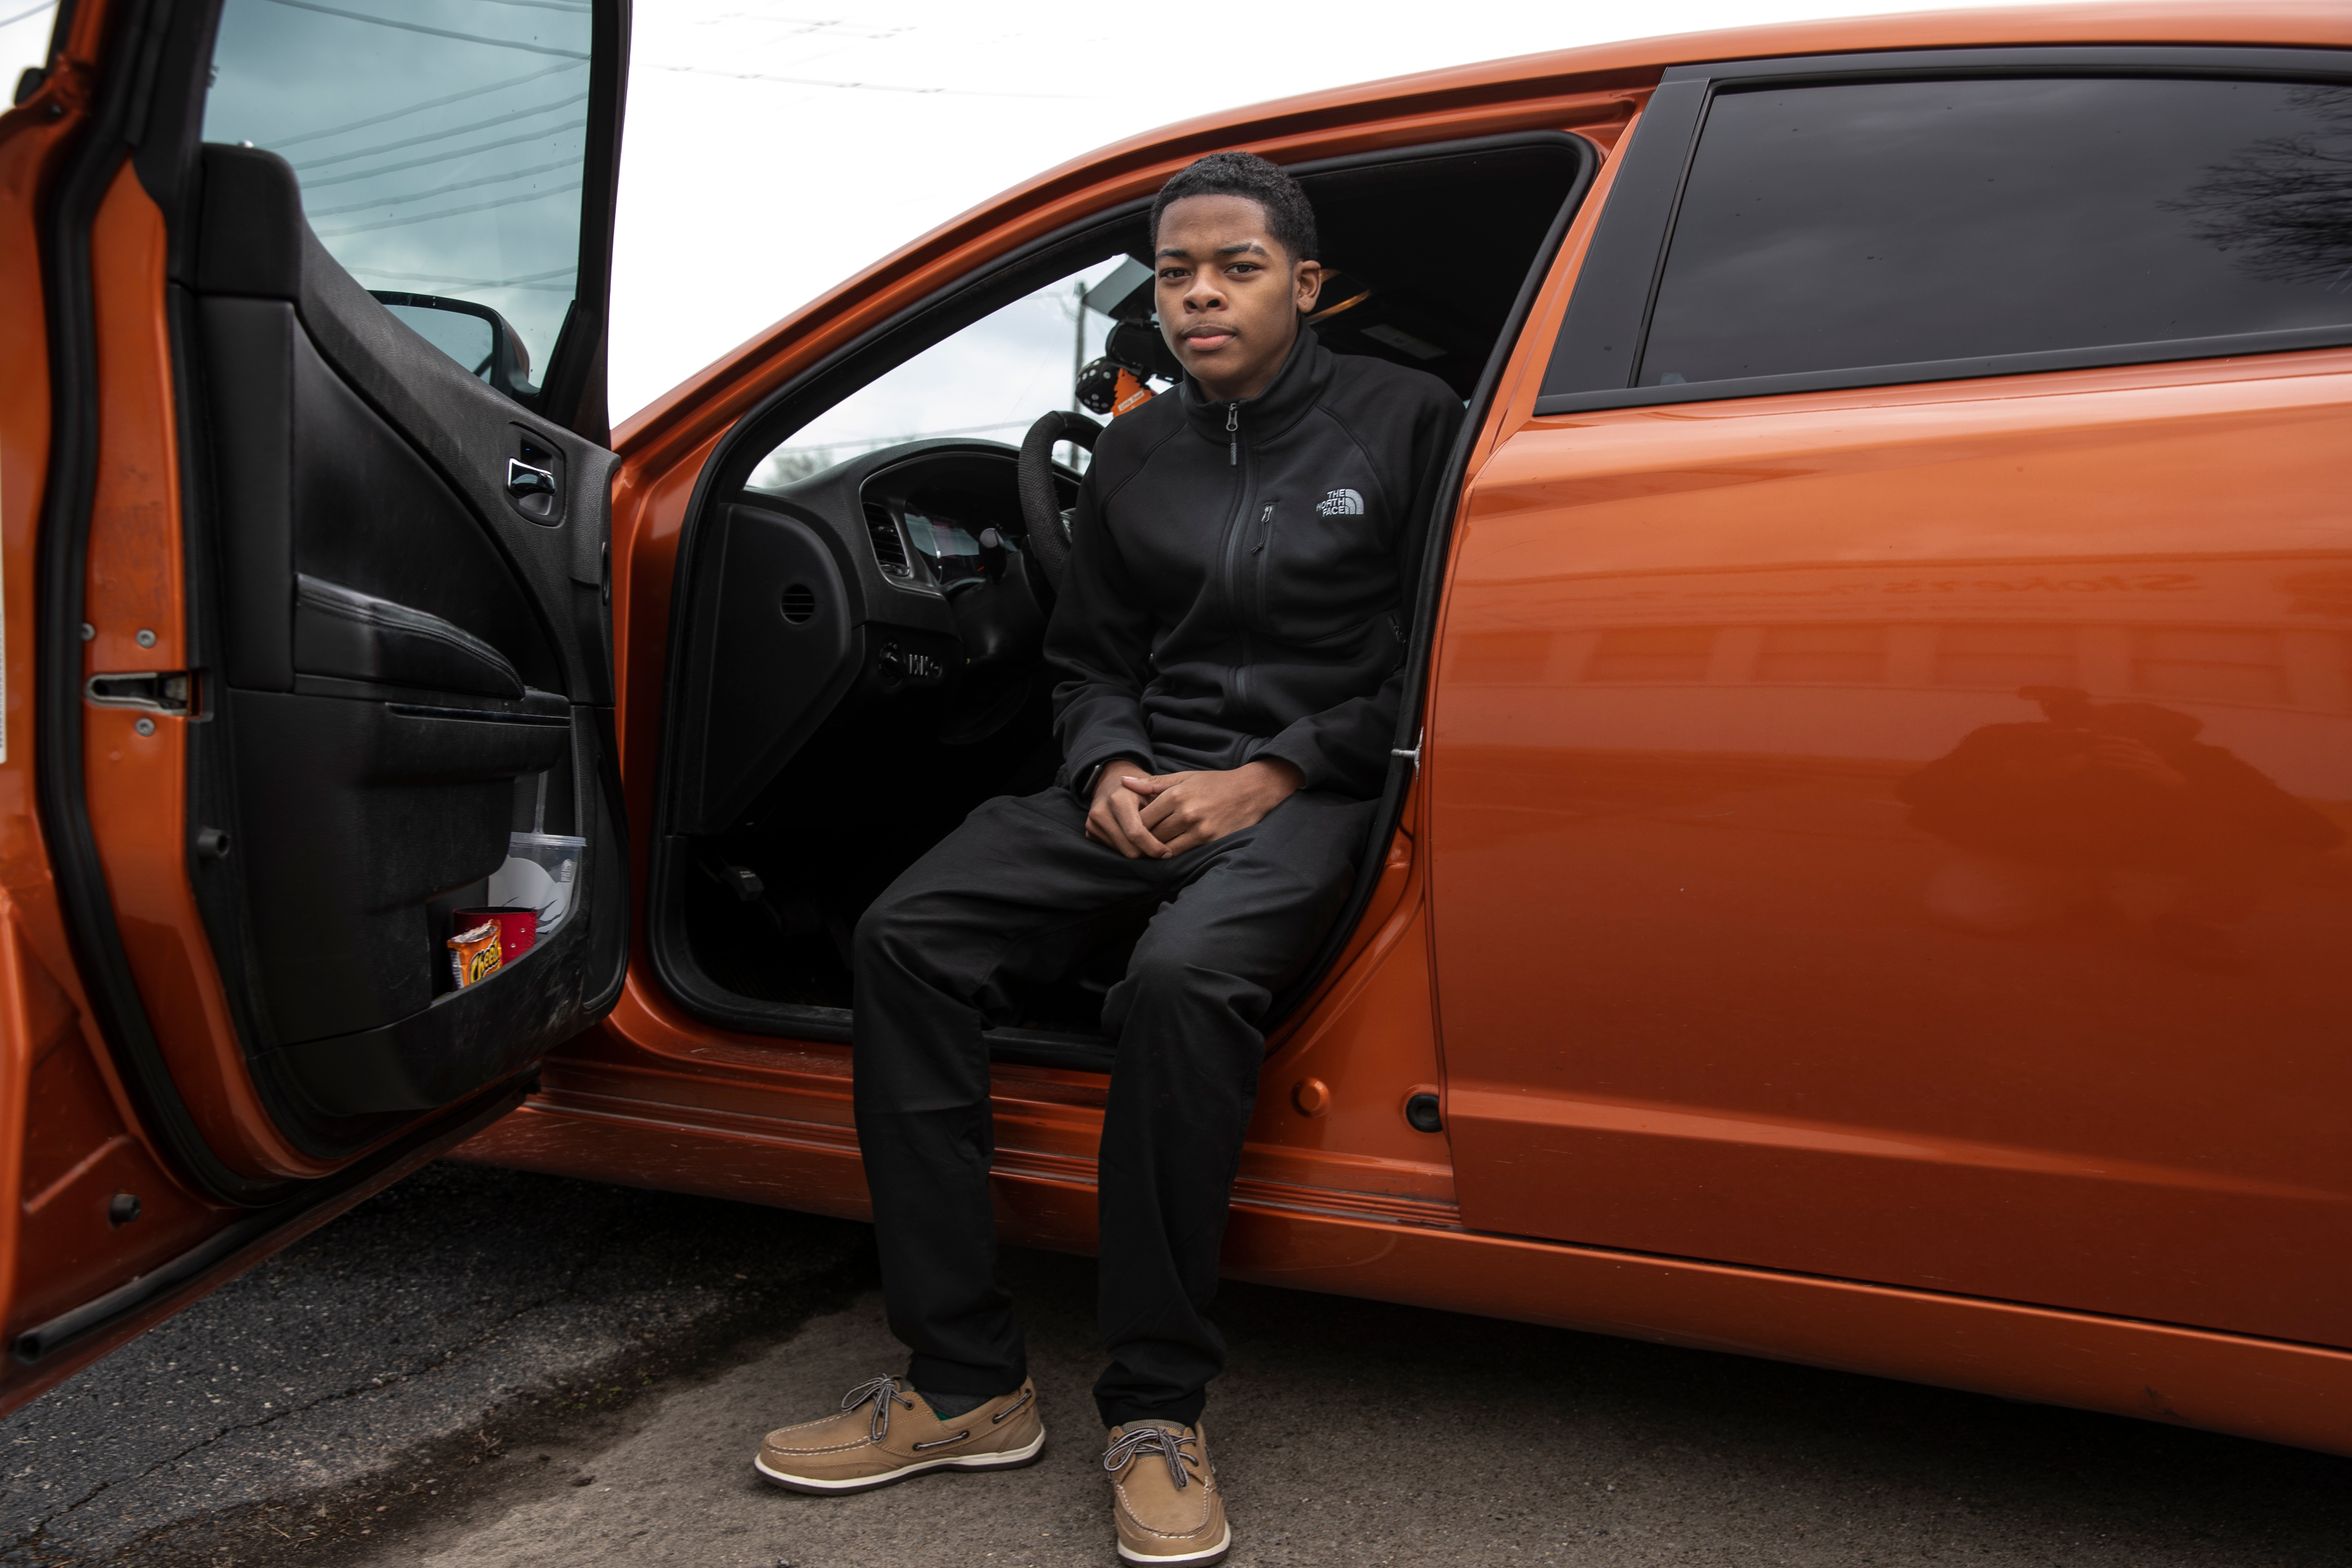 Tae-Ahn Lea, 18 was stopped by police, frisked and handcuffed at 18th and Burwell Ave. He is seen with the car he was driving. March 21, 2019.